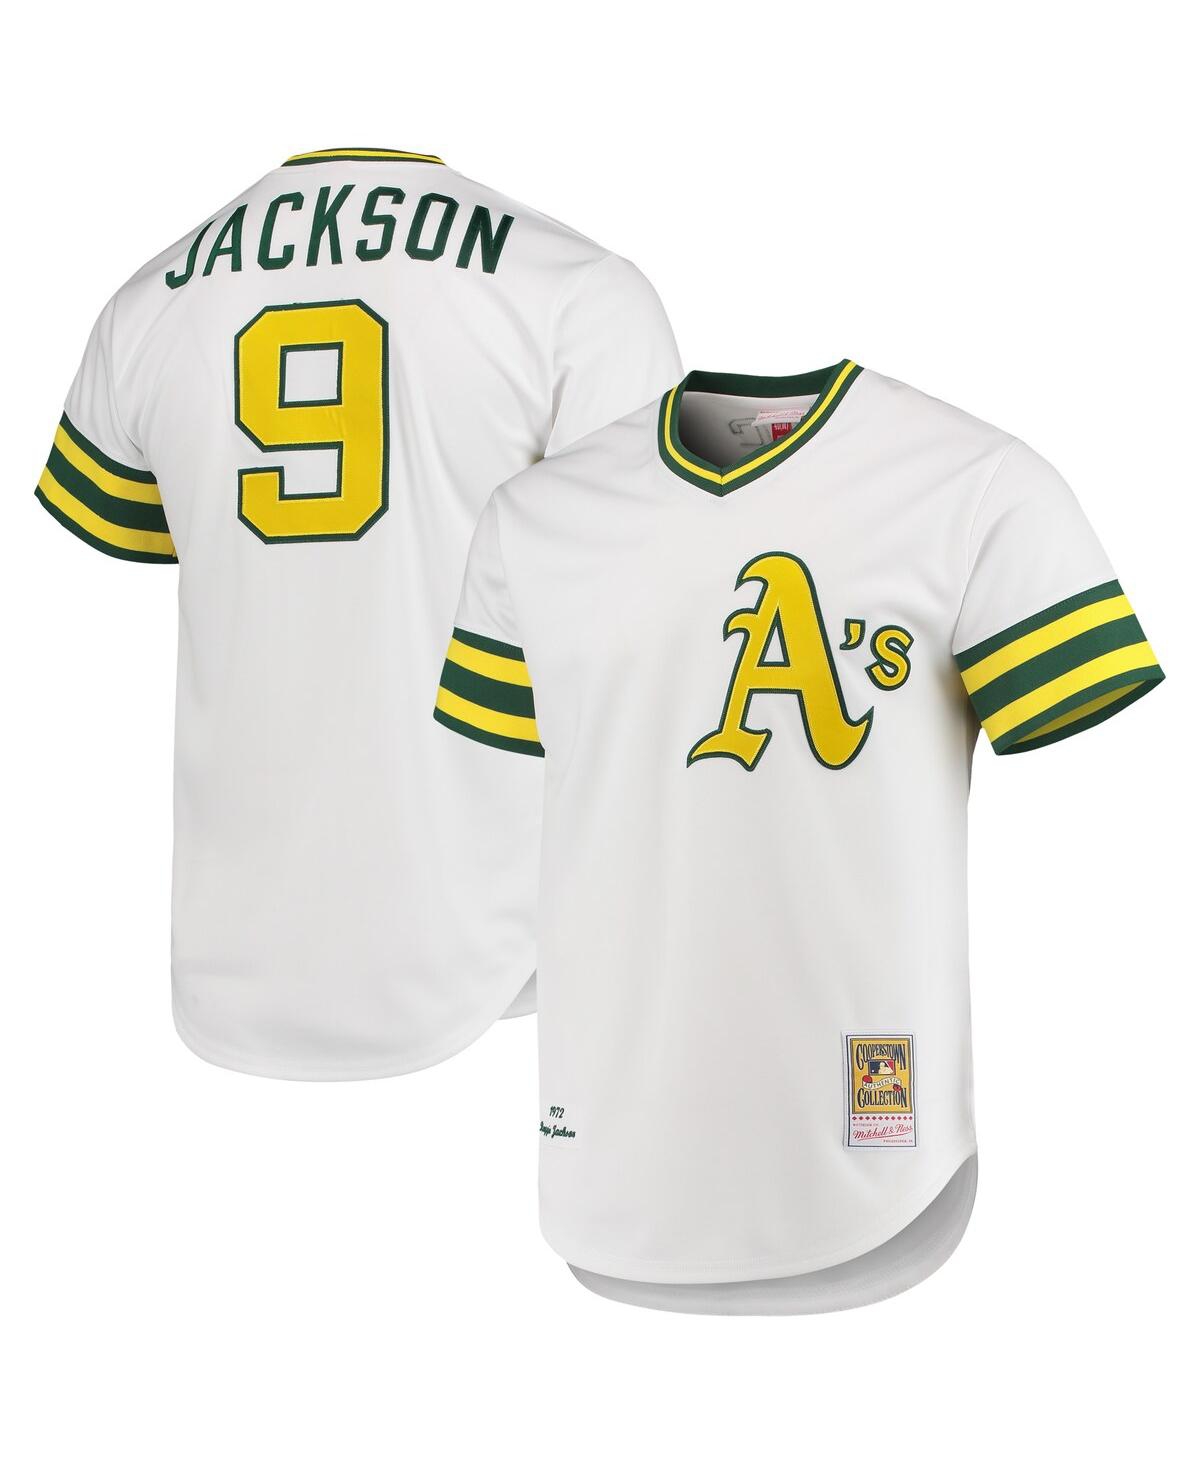 Men's Mitchell & Ness Reggie Jackson White Oakland Athletics 1972 Cooperstown Collection Authentic Jersey - White